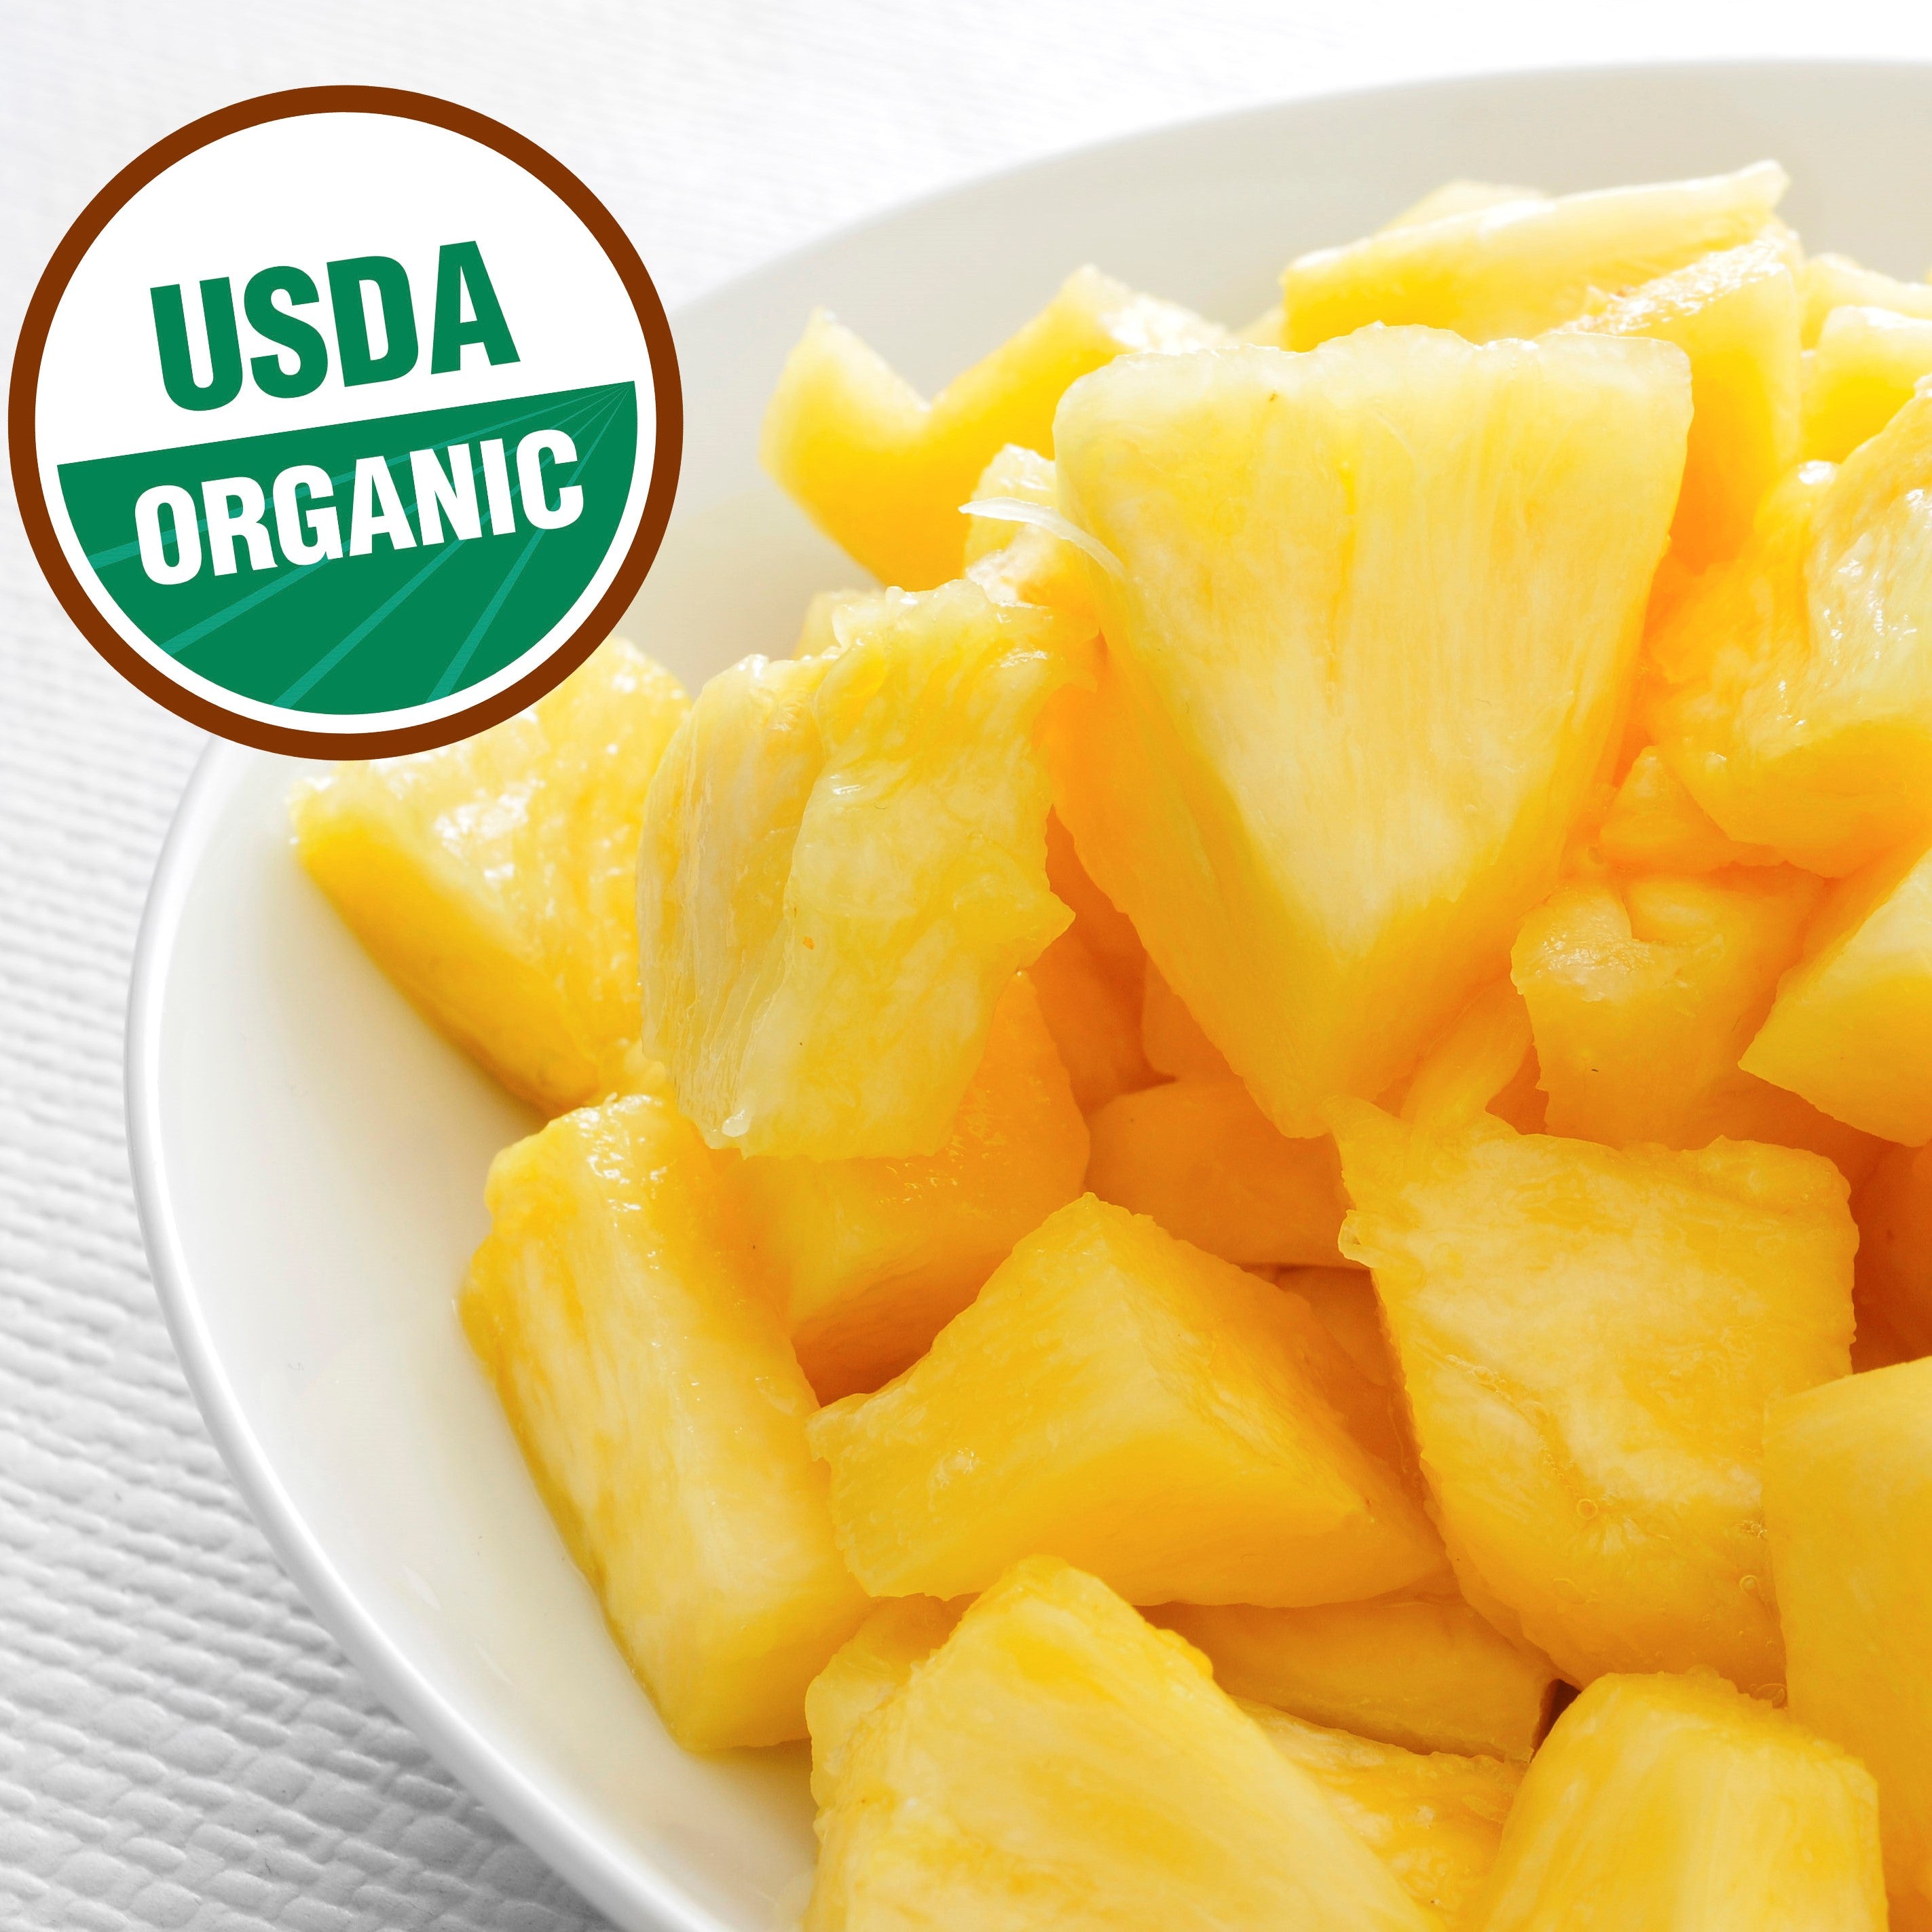 Frozen Pineapple Offers From Costa Rica